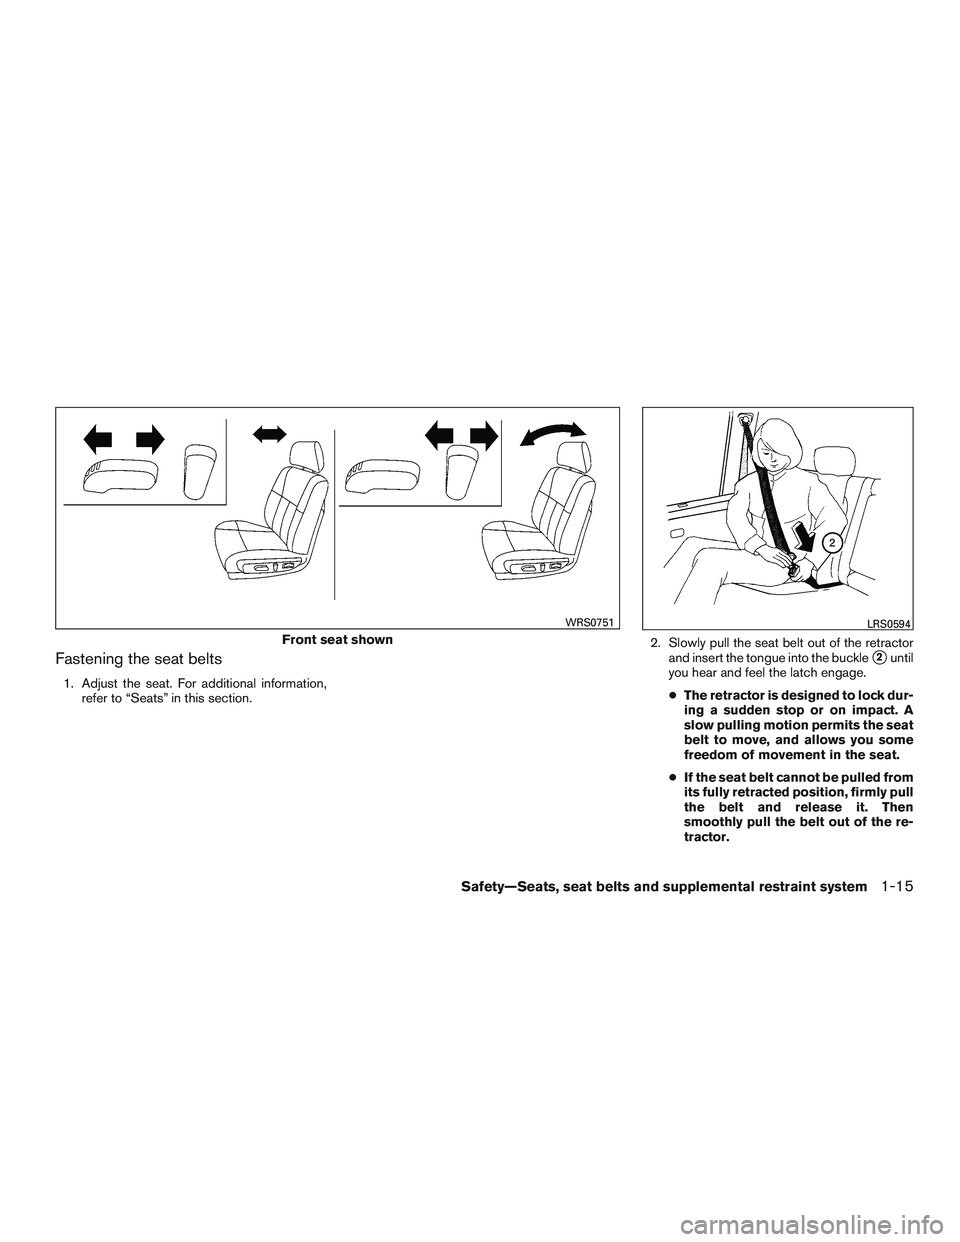 NISSAN ALTIMA SEDAN 2015 Owners Guide Fastening the seat belts
1. Adjust the seat. For additional information,refer to “Seats” in this section. 2. Slowly pull the seat belt out of the retractor
and insert the tongue into the buckle
2